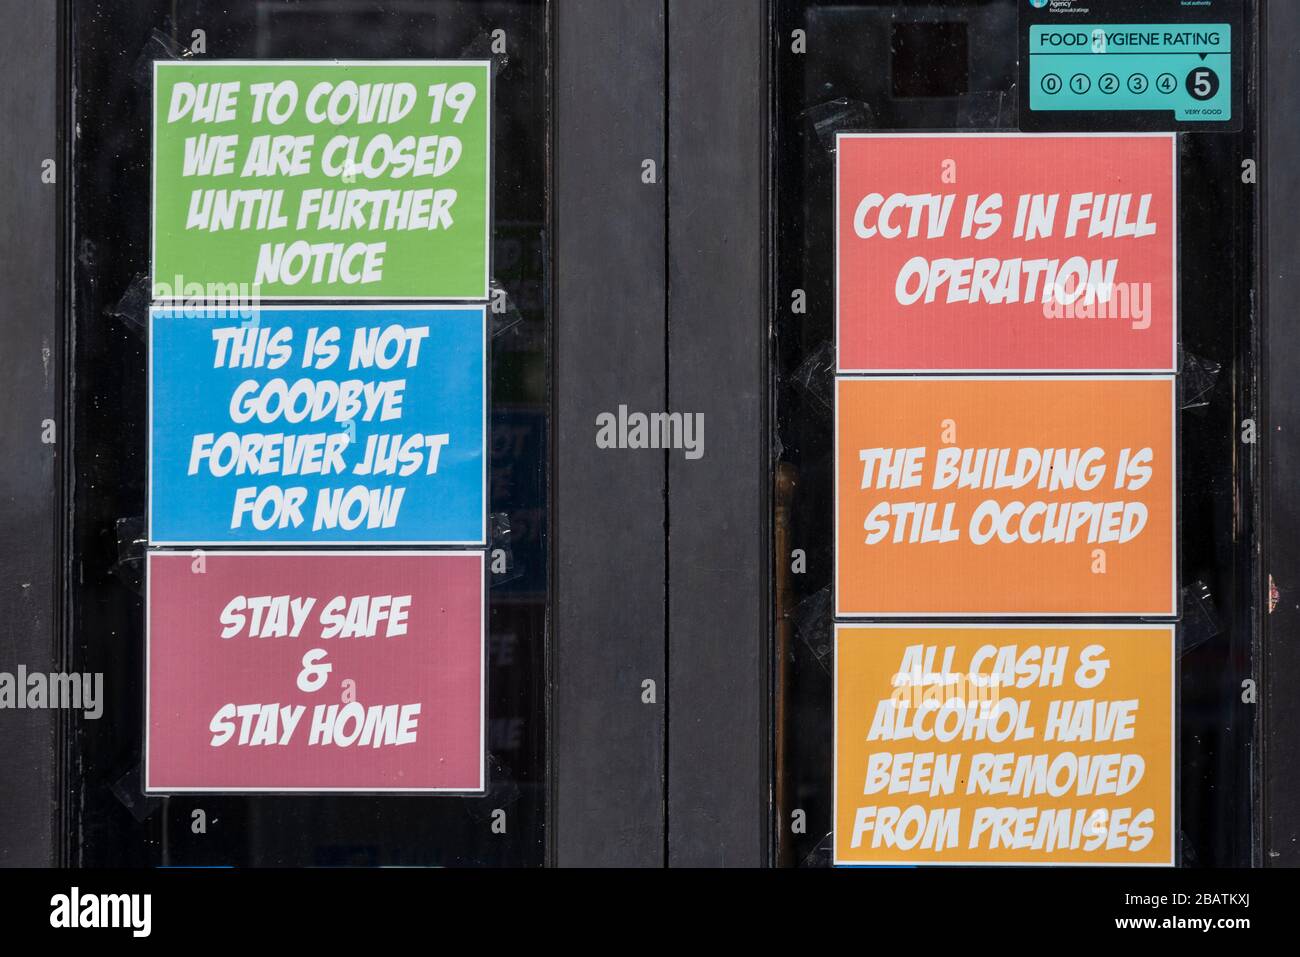 The Cliff pub, public house, closed during the COVID-19 Coronavirus pandemic outbreak lockdown. Messages to customers. This is not goodbye. Stay safe Stock Photo